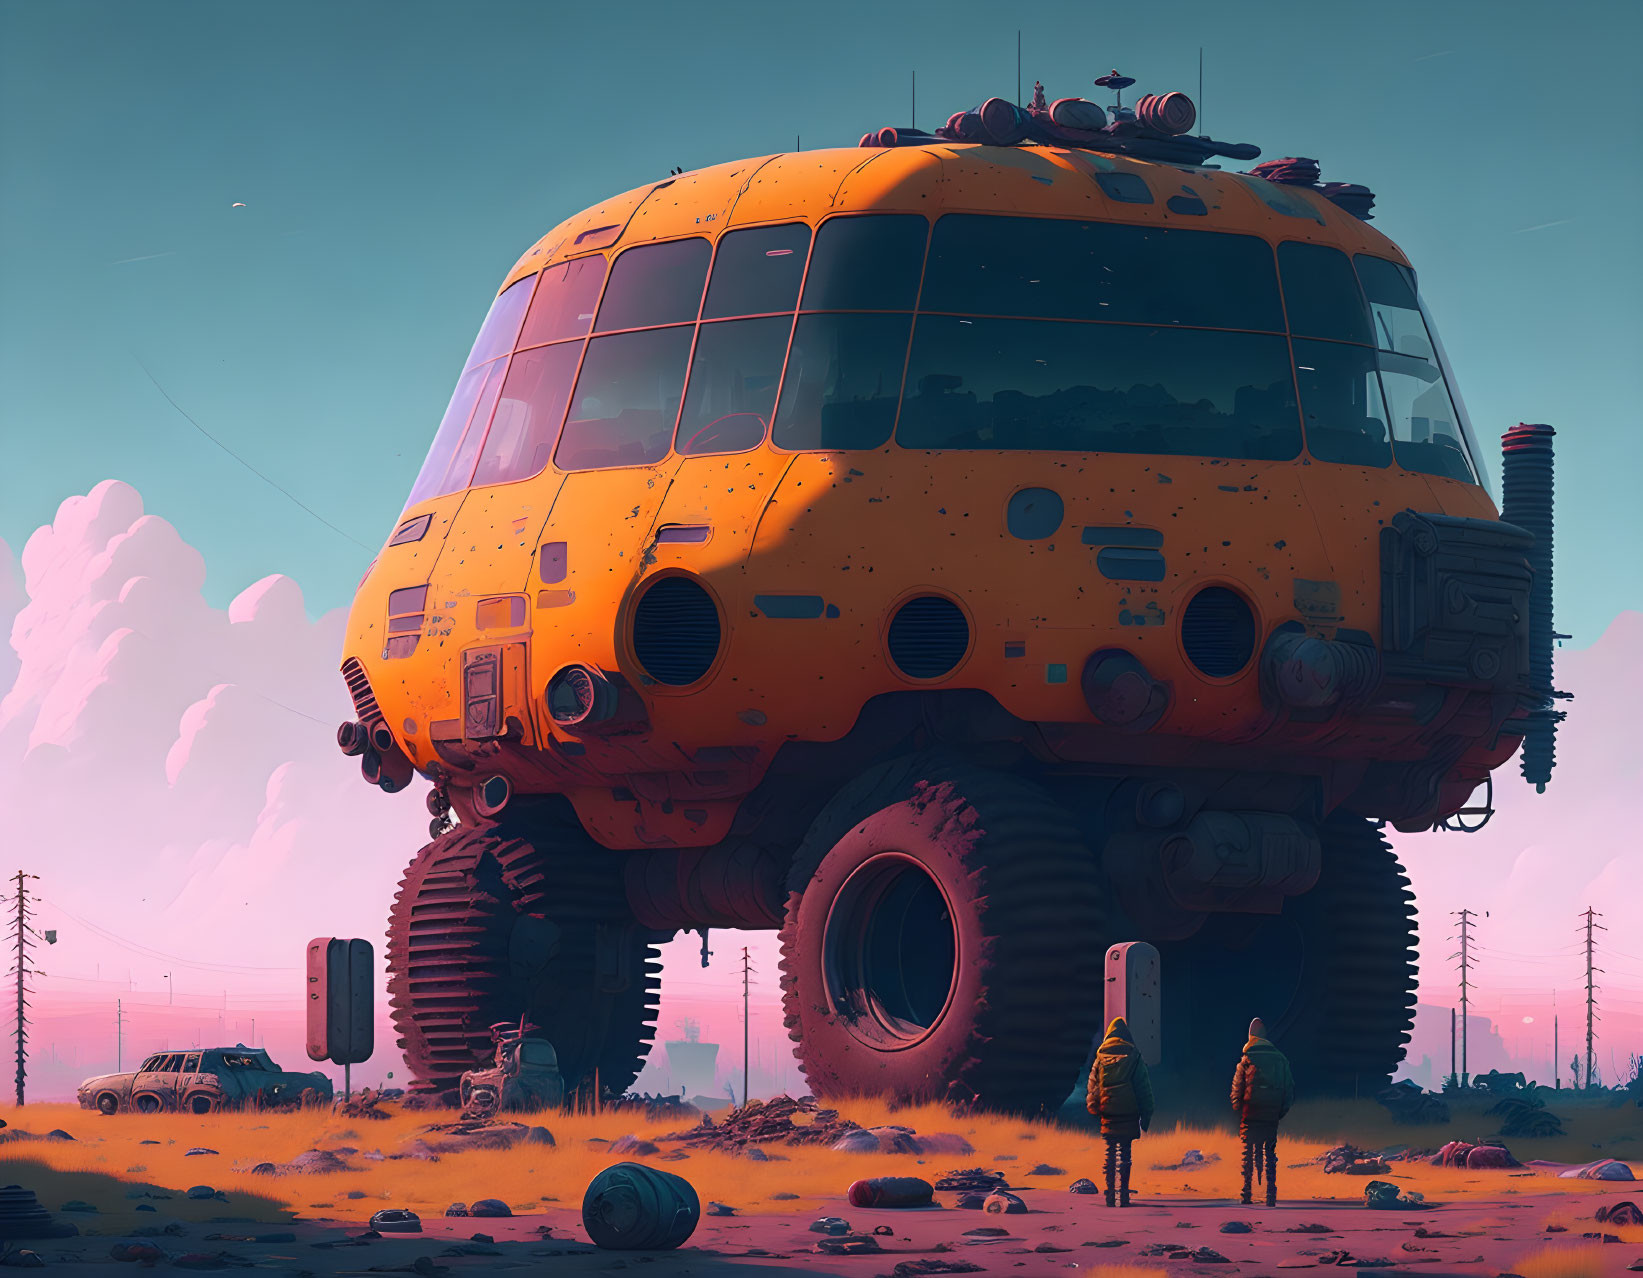 Futuristic oversized vehicle with large wheels in desert landscape with figures in hazmat suits